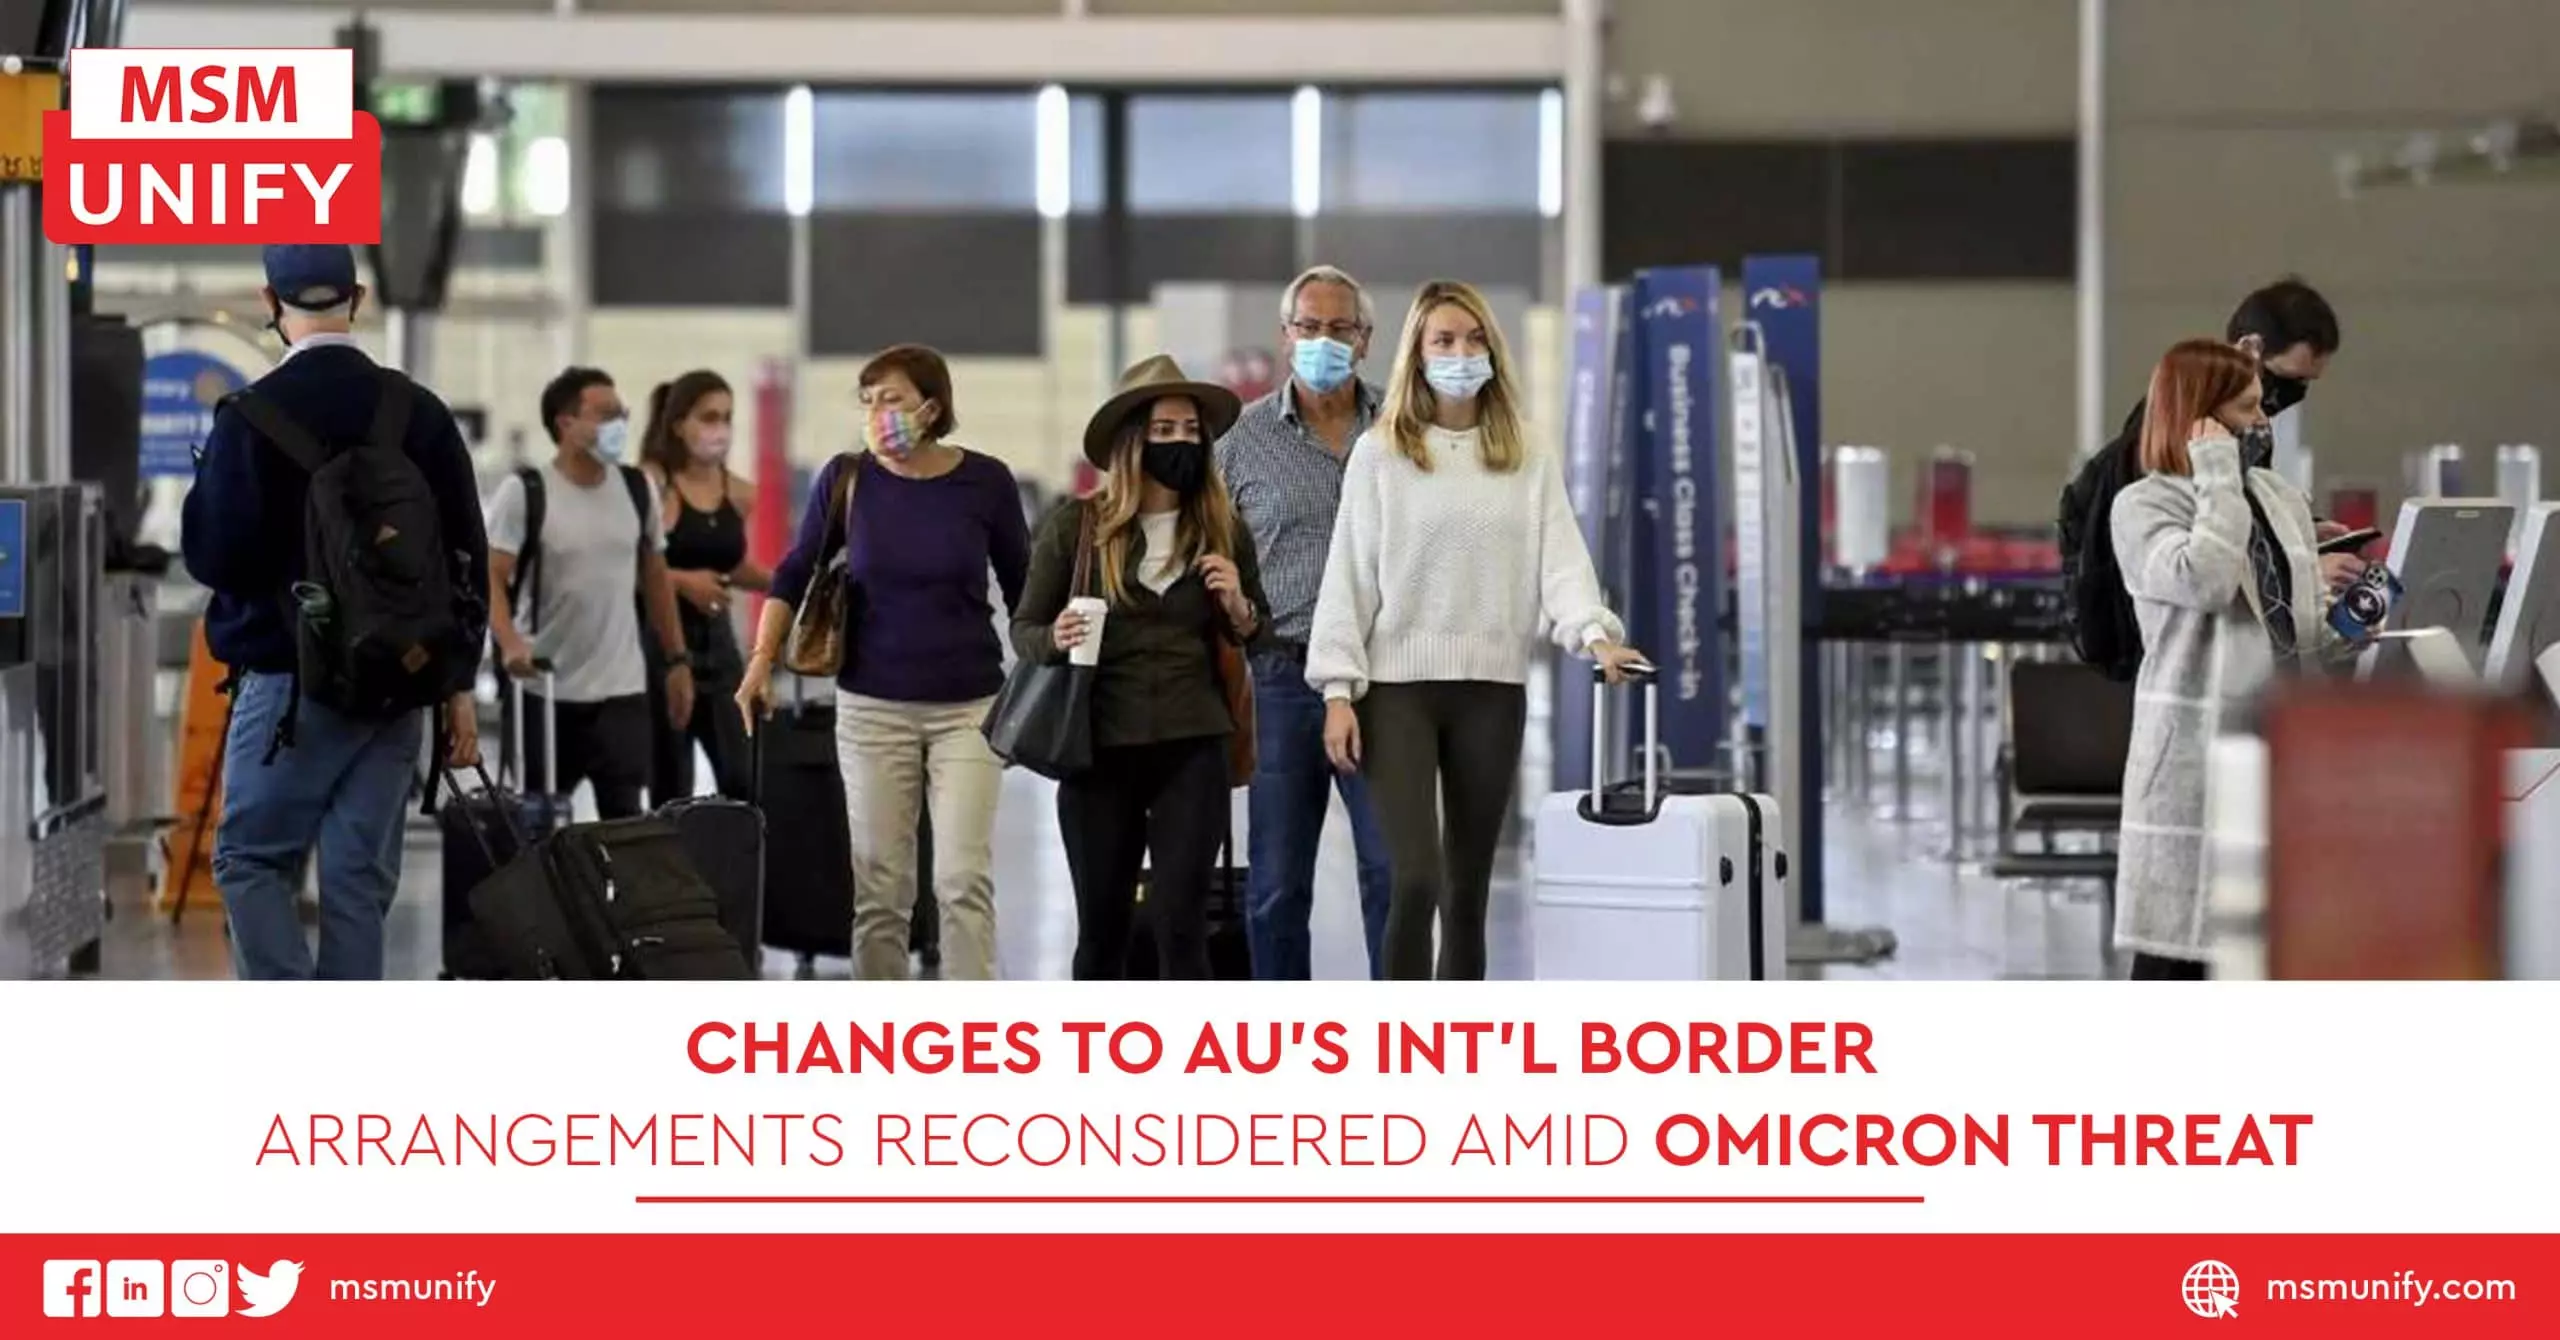 Changes to AUs Intl Border Arrangements Reconsidered Amid Omicron Threat scaled 1